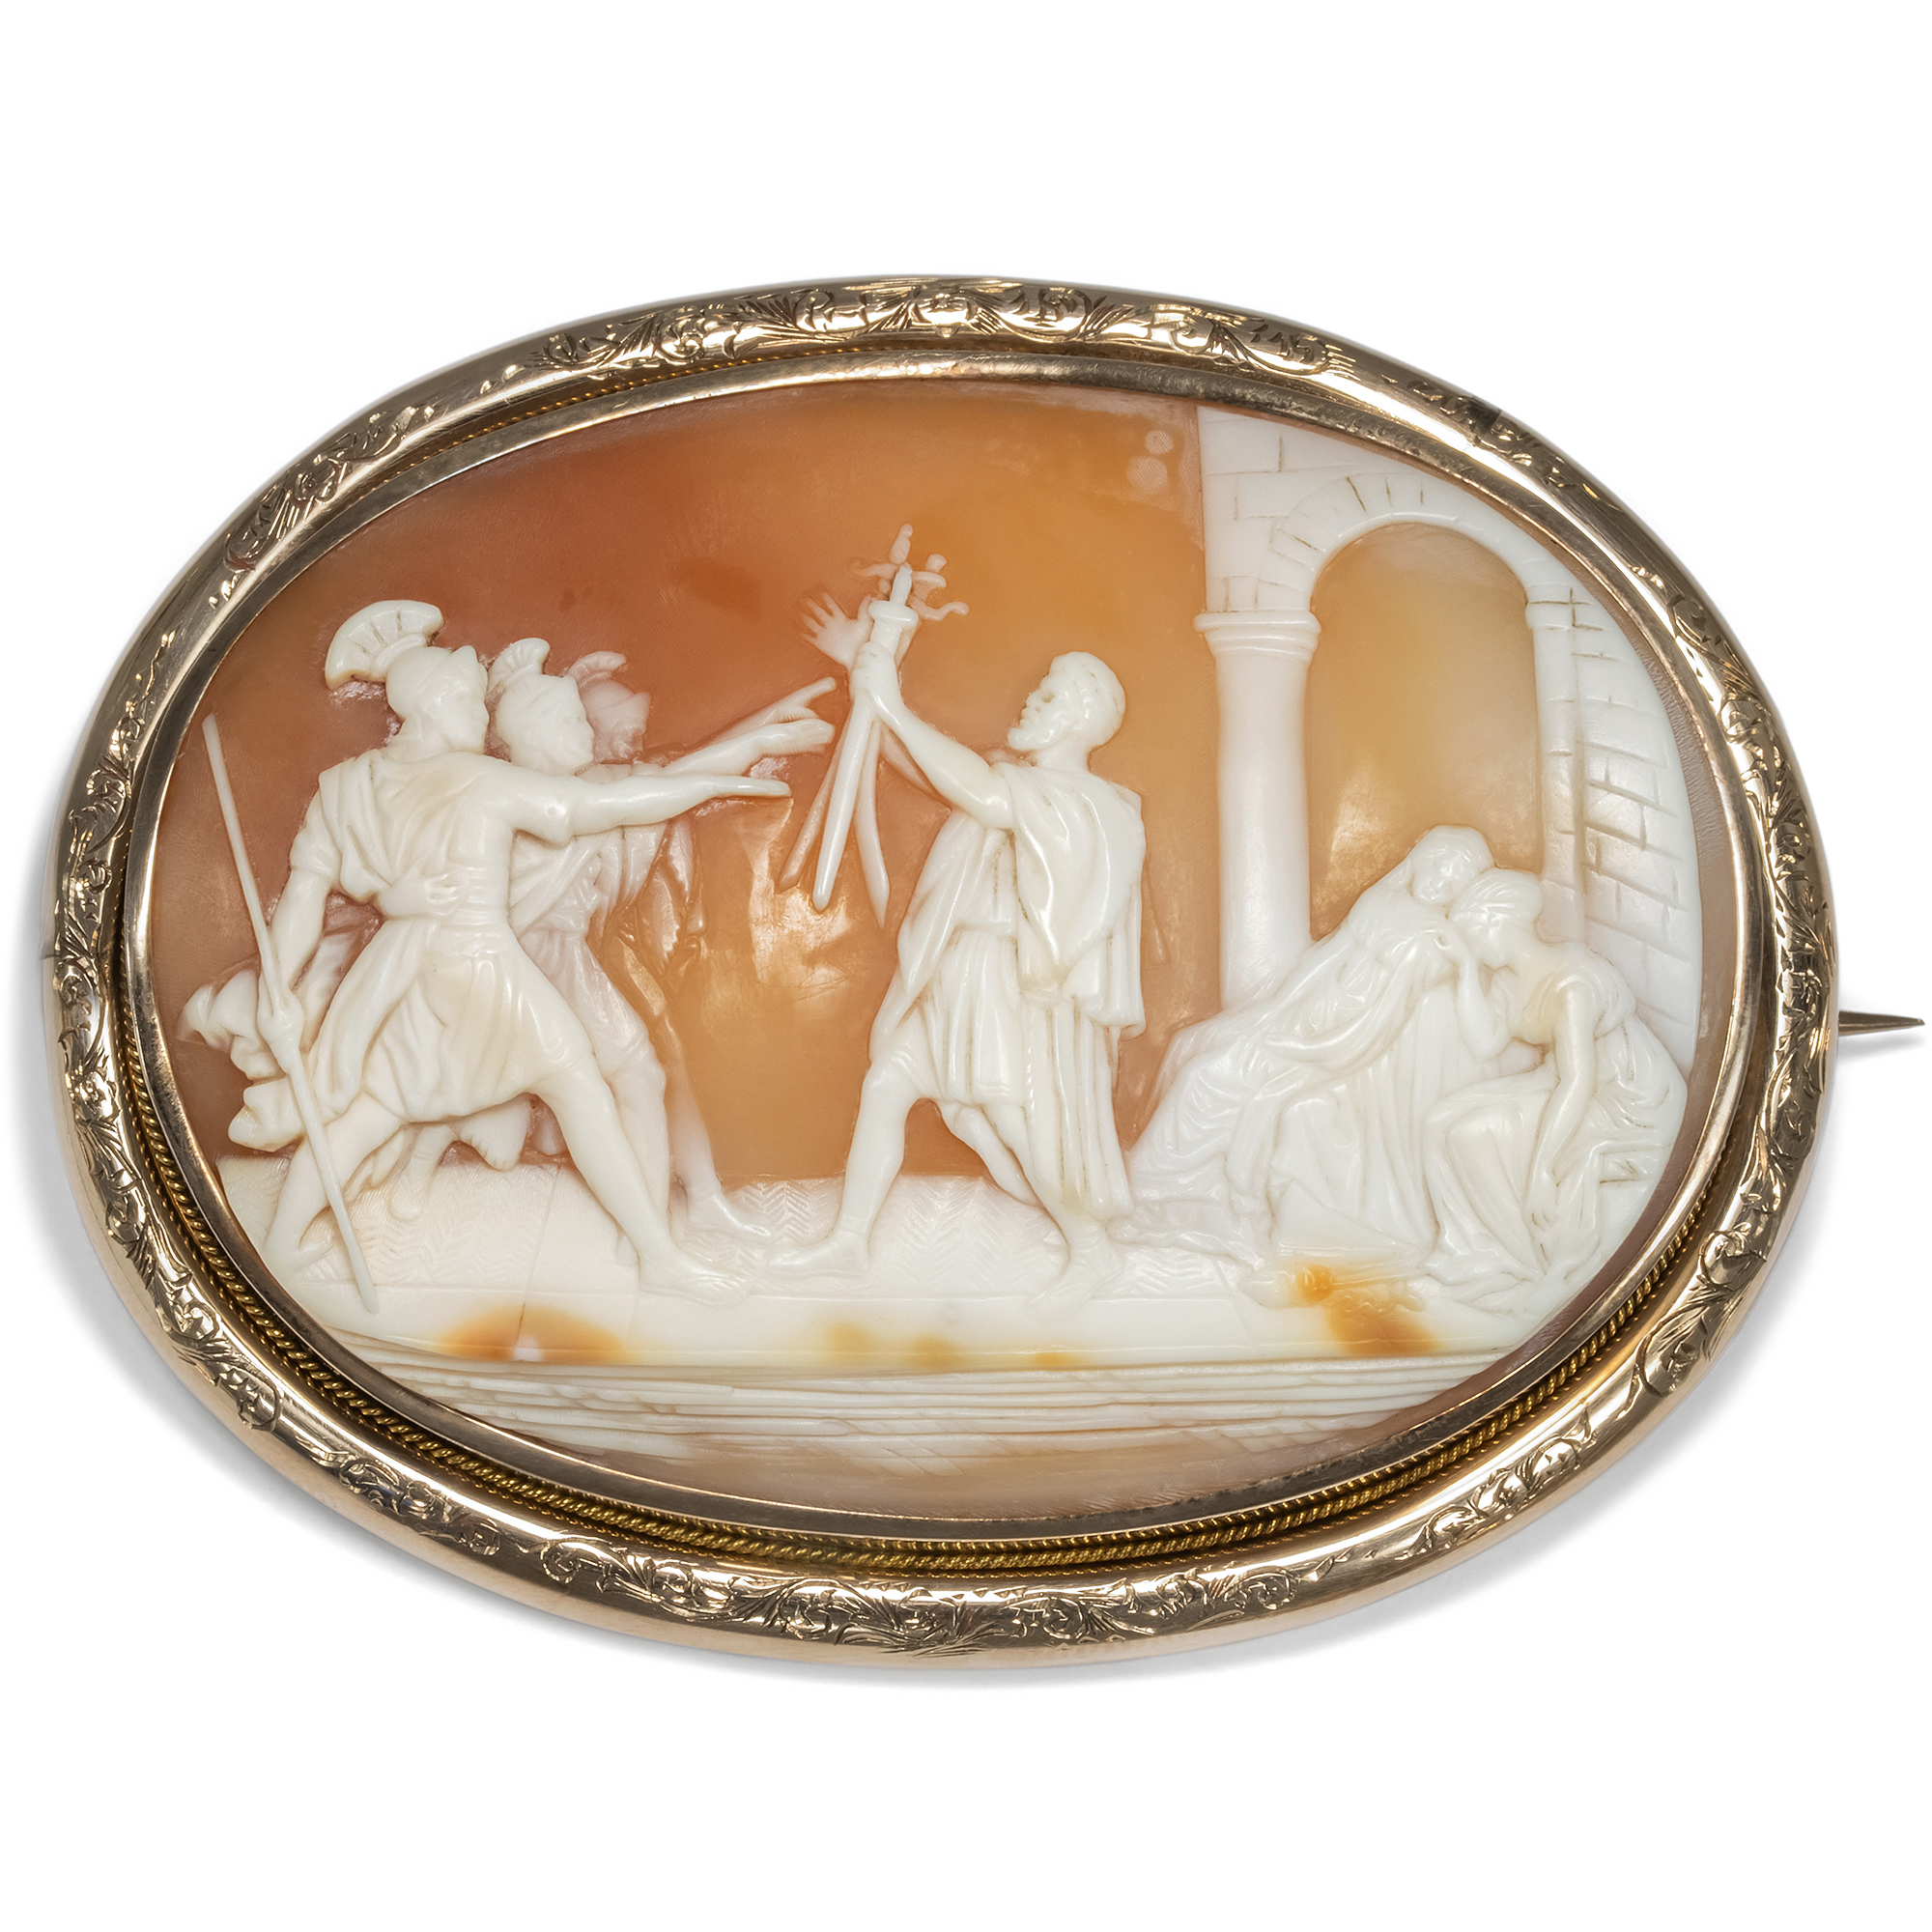 Large Antique Cameo after Jacques-Louis David in Gold, c. 1860